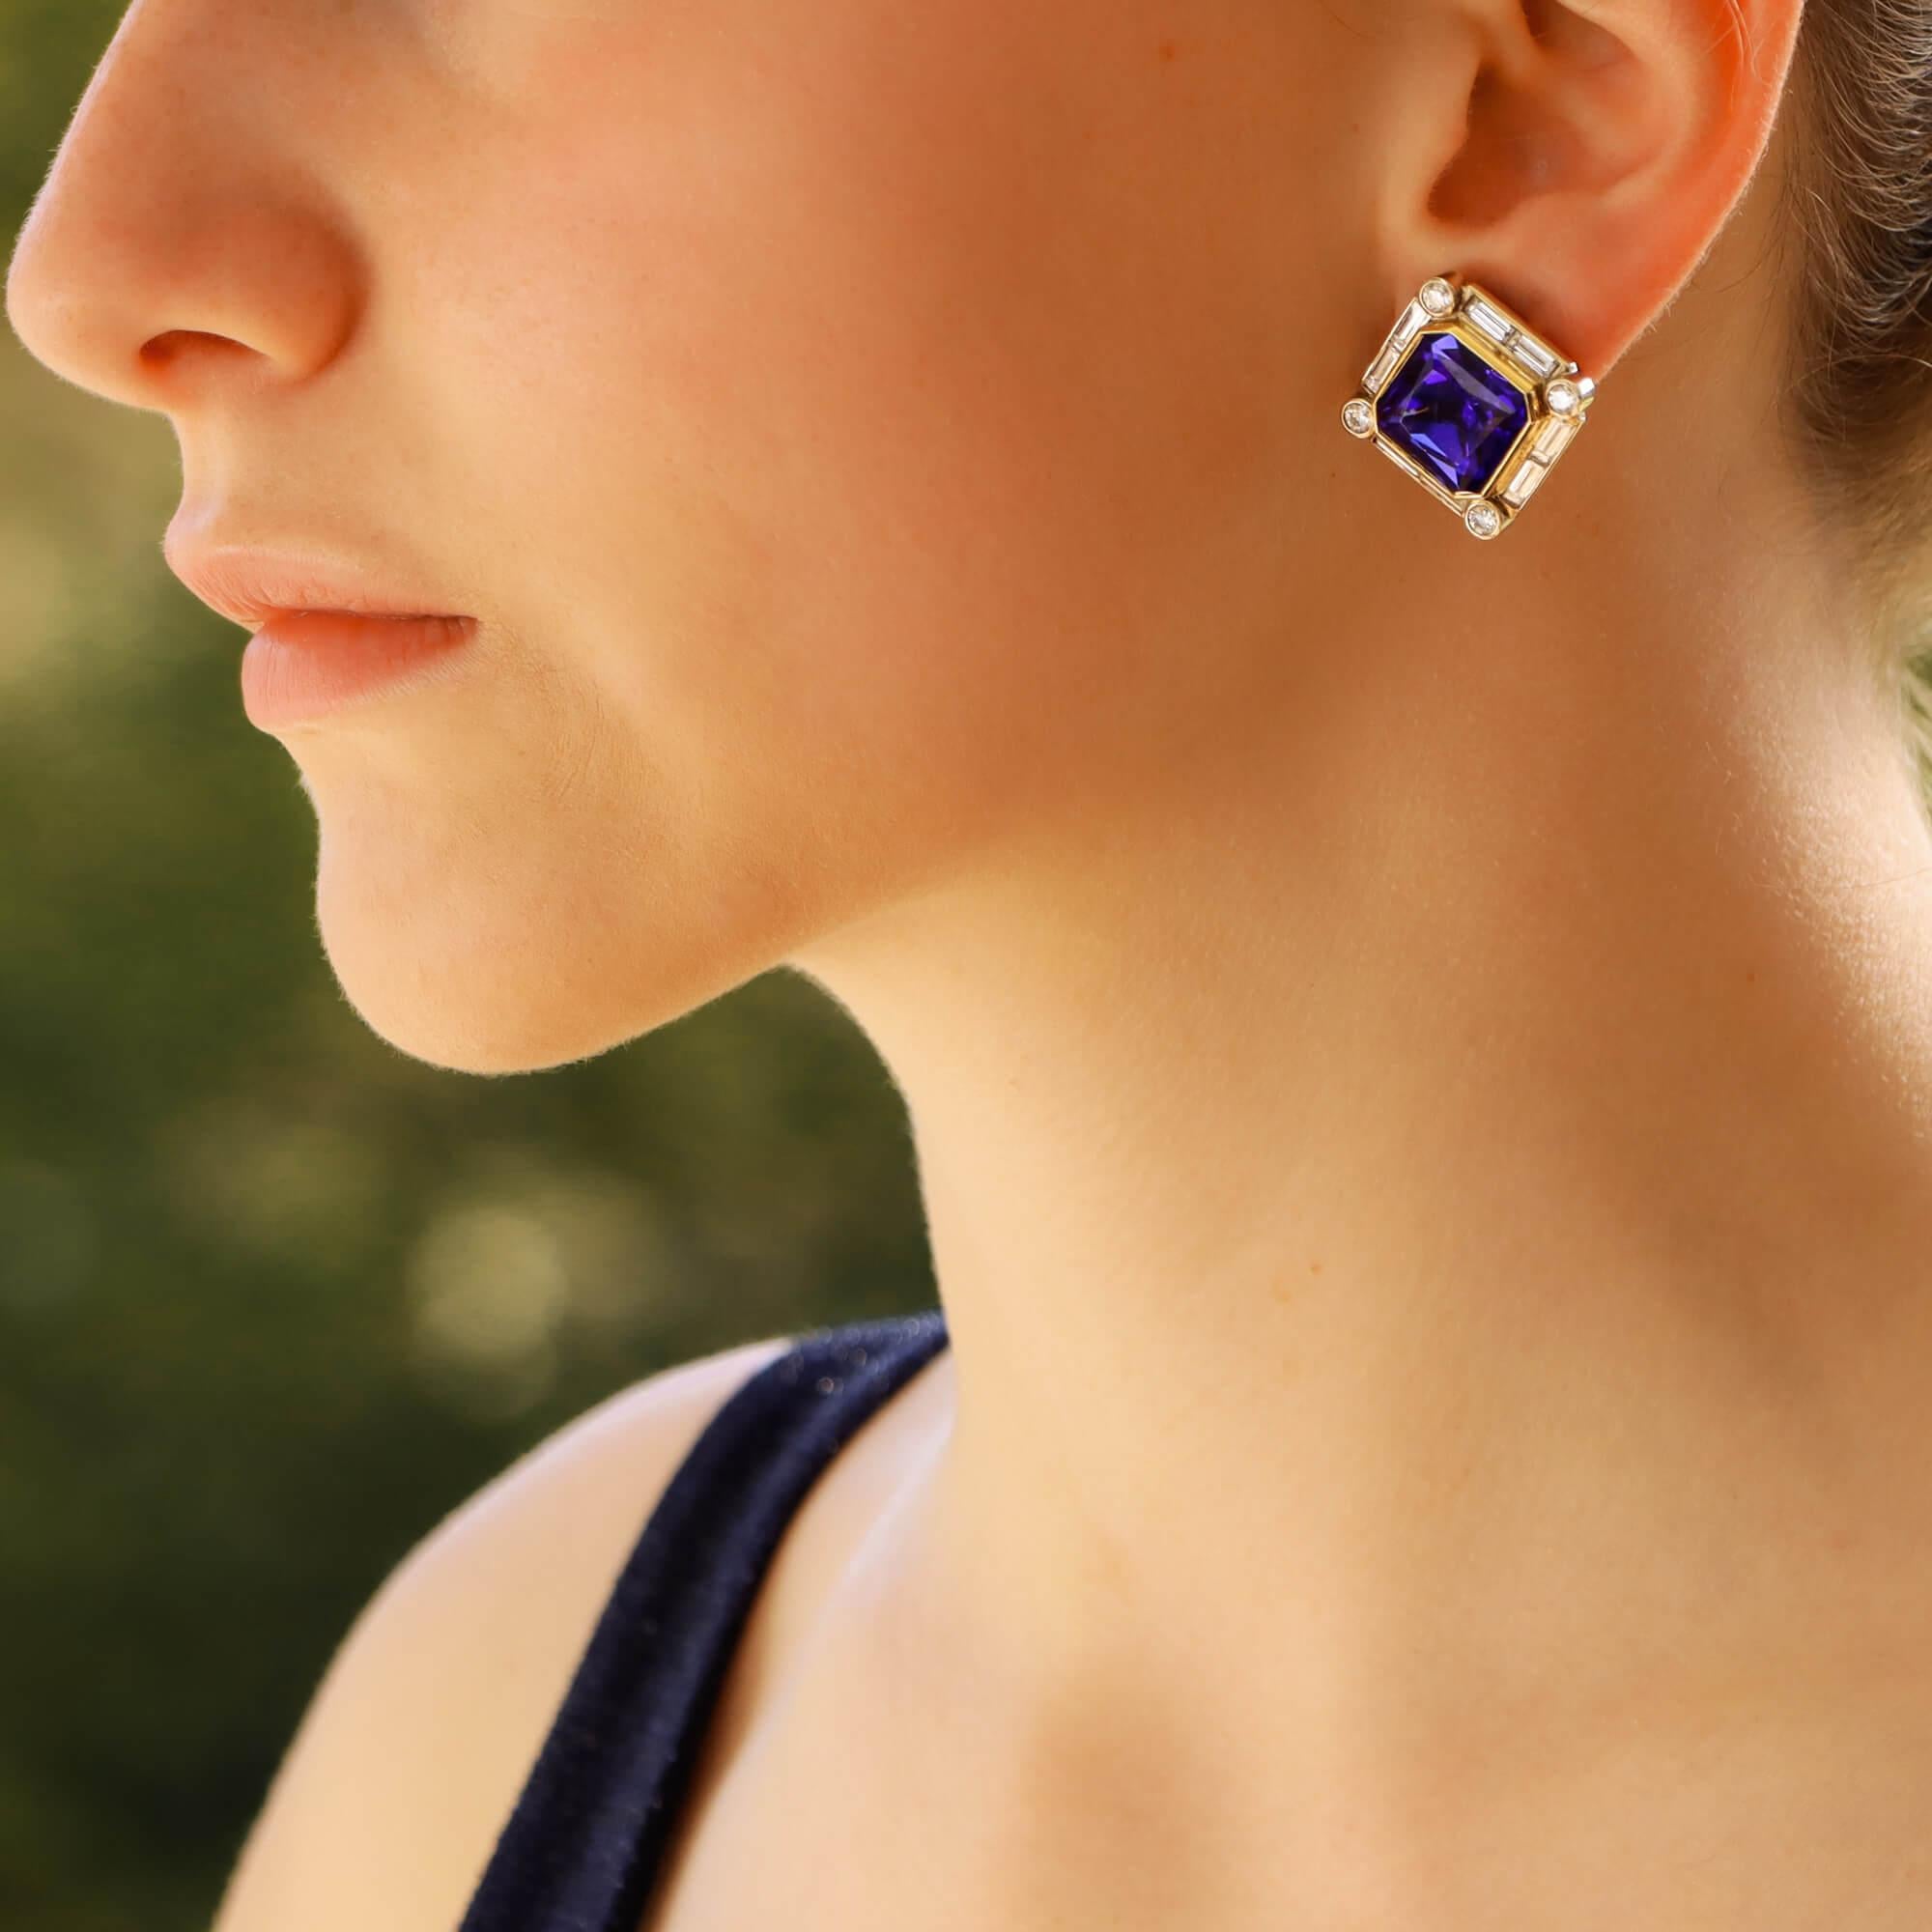 A magnificent pair of tanzanite and diamond clip on earrings in 18 karat yellow and white gold.

Each earring features a large scissor-cut (similar to square-cut) tanzanite of a deep violetish-blue colour which is rubover-set in a yellow gold